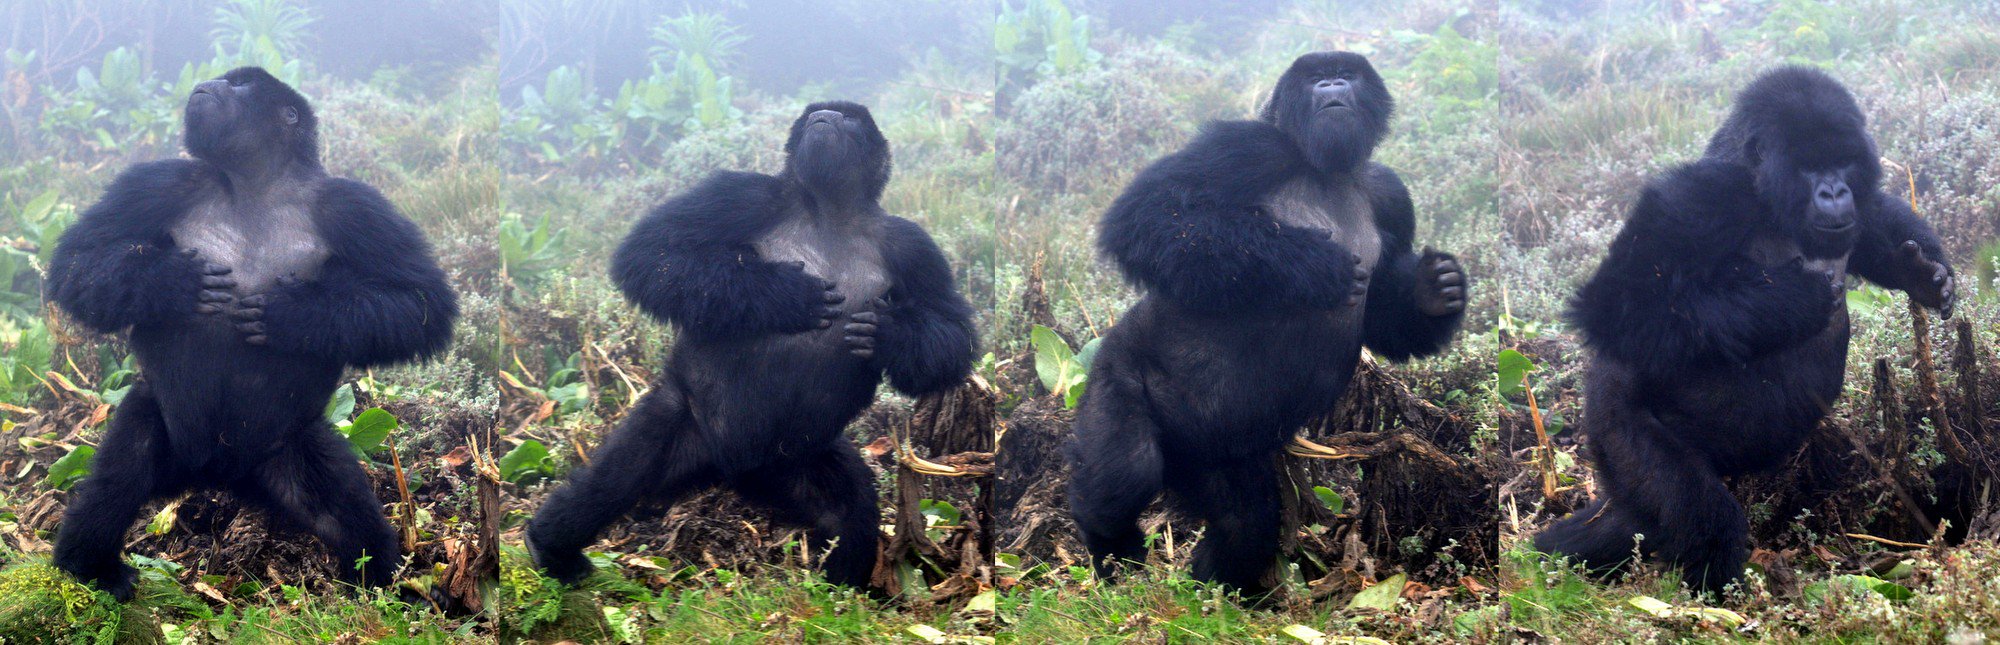 A male gorilla chest beating